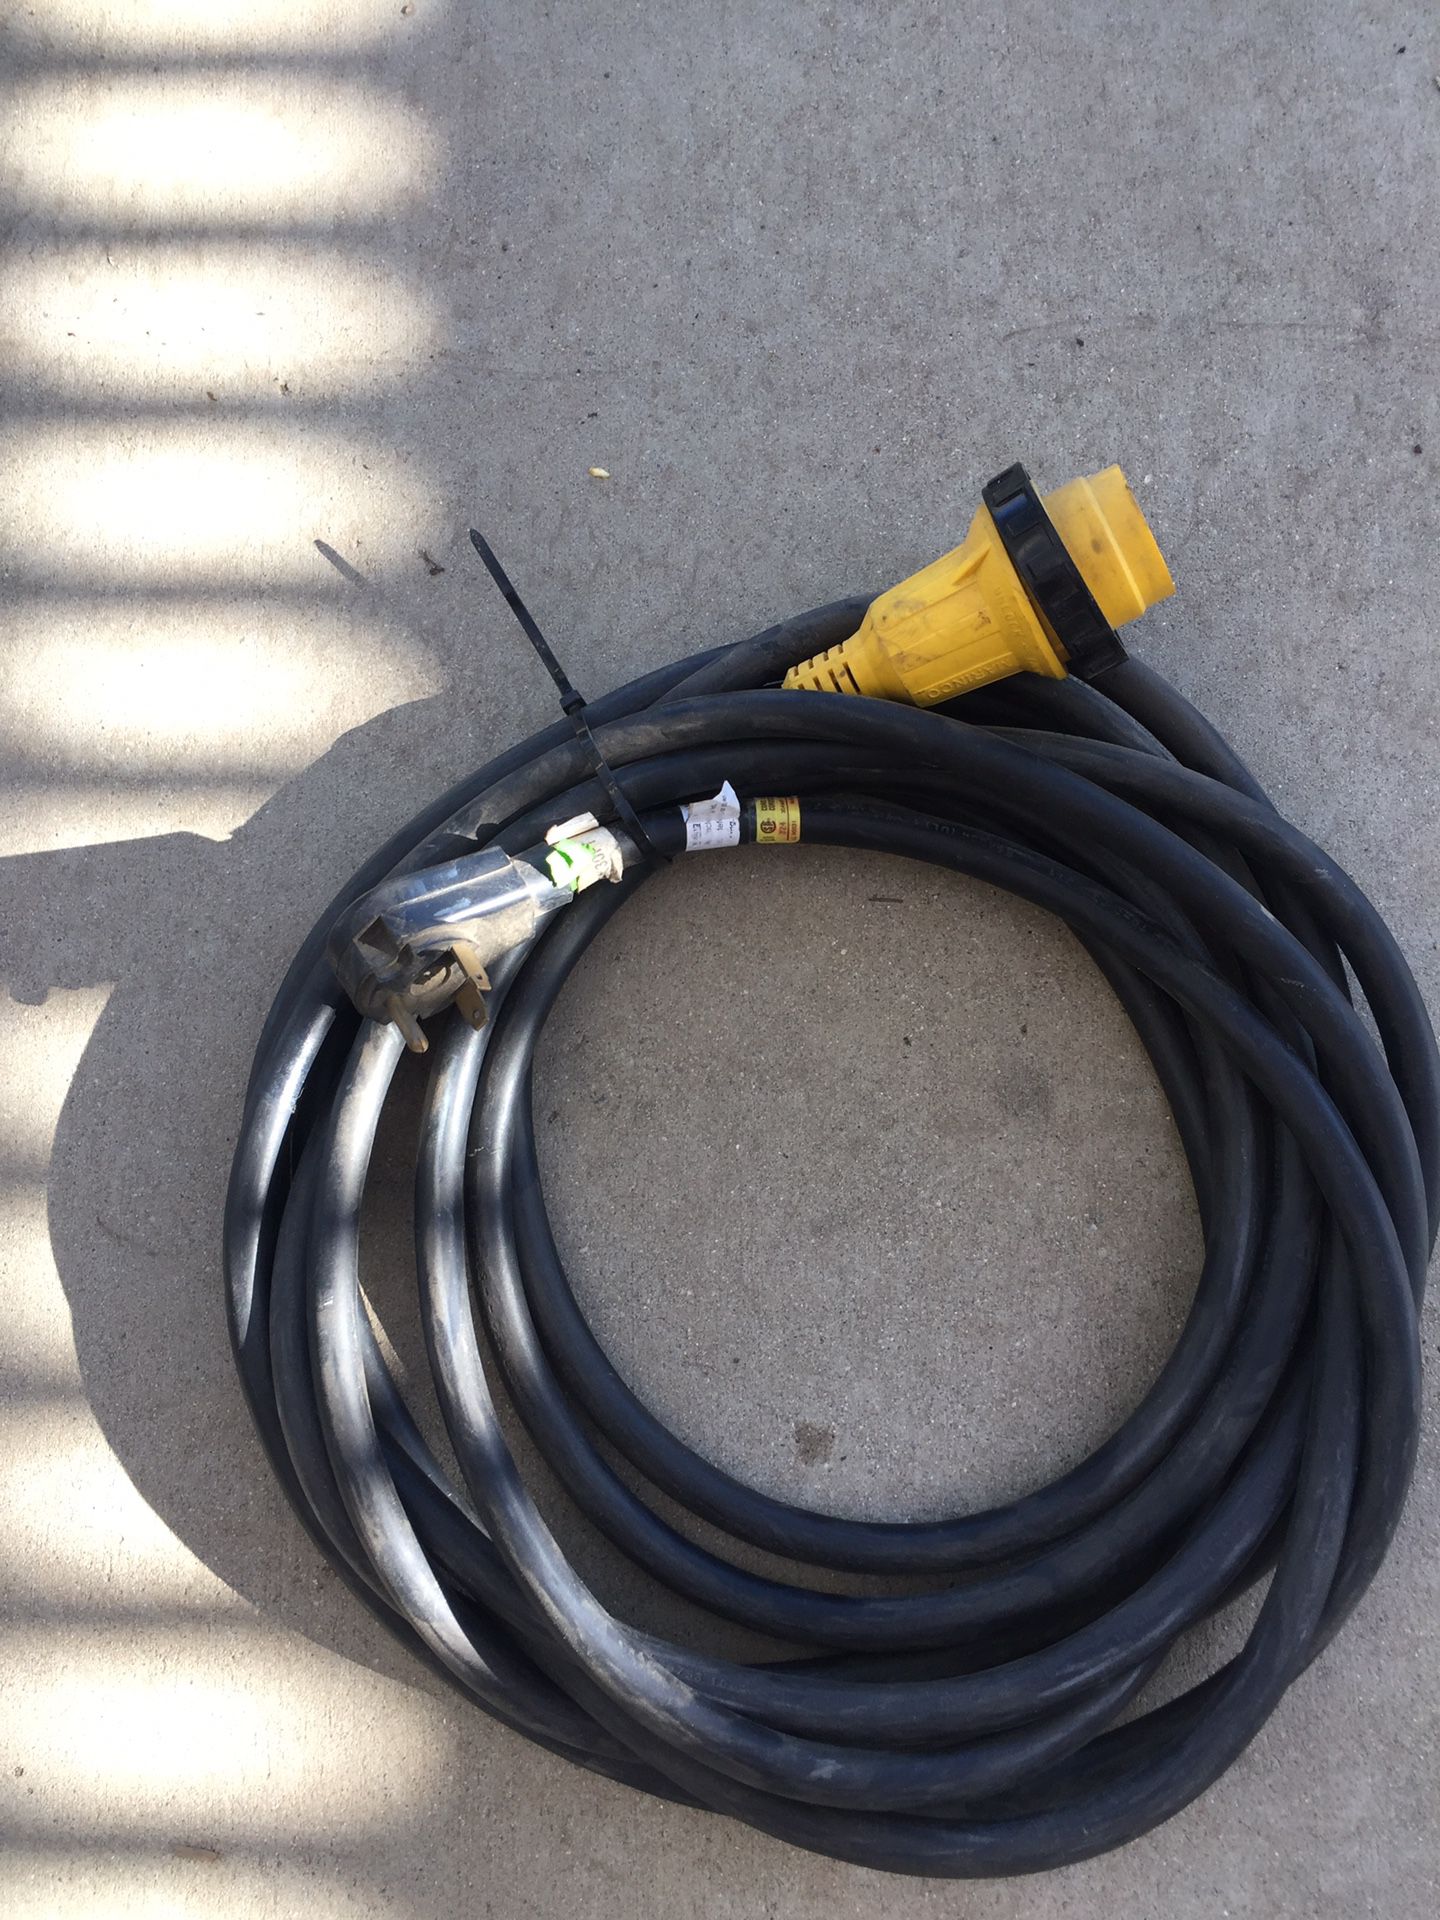 30 amp 30 ft RV power cord with a twist lock connection